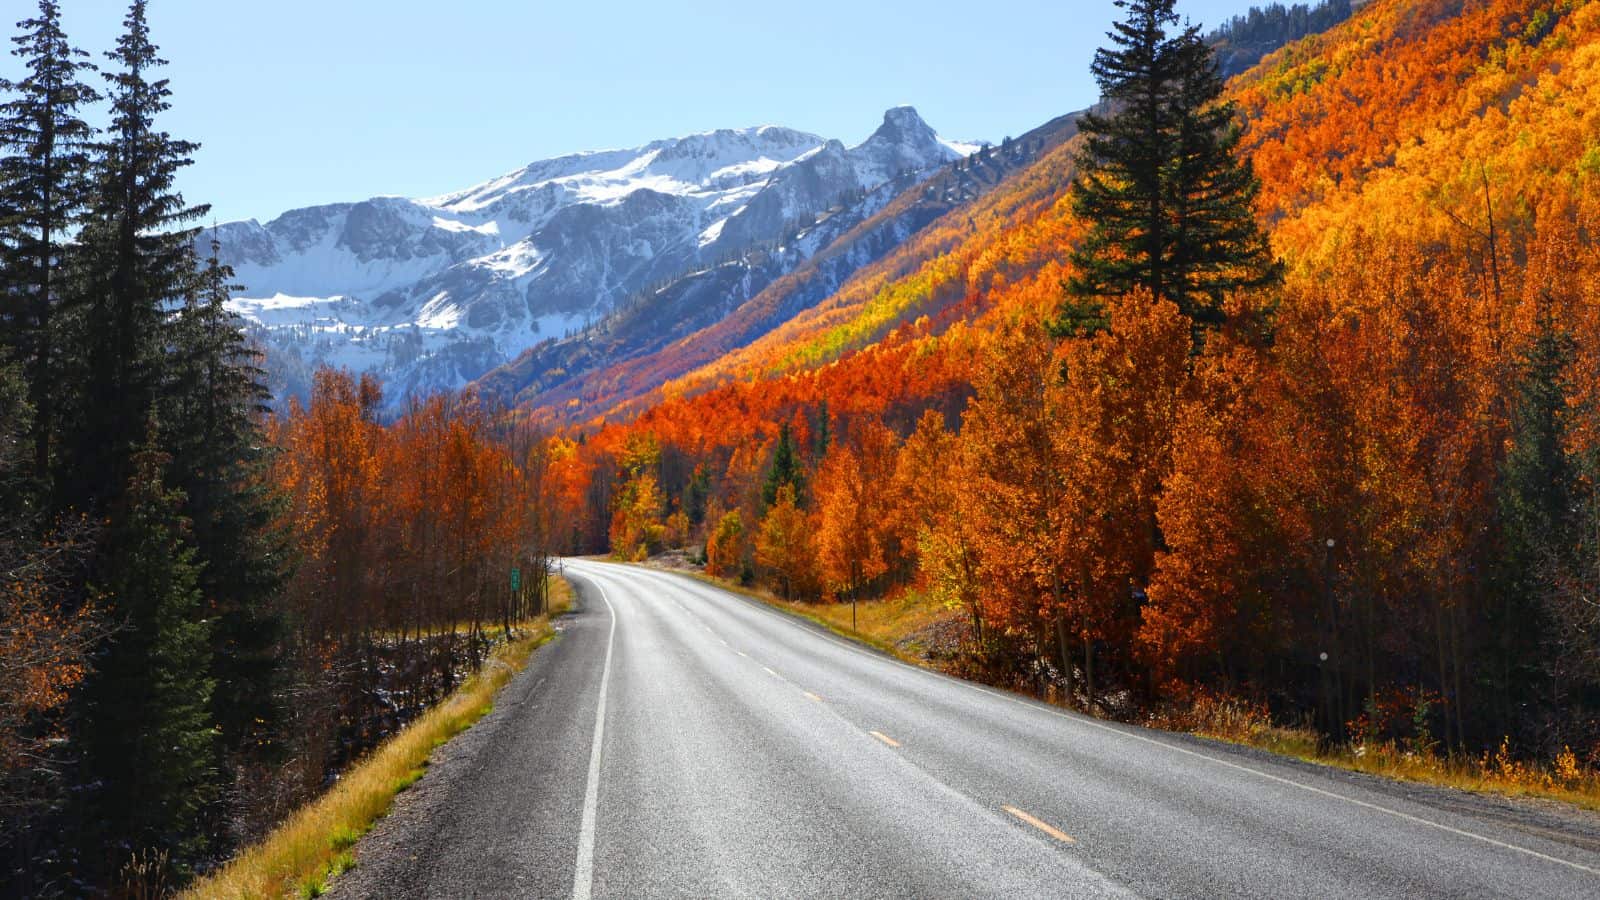 <p>Drive the thrilling Million Dollar Highway in Colorado, navigating steep cliffs, hairpin turns, and breathtaking views of the San Juan Mountains.</p><p>This 25-mile stretch of U.S. Route 550 between Ouray and Silverton offers some of the country’s most dramatic mountain scenery.</p><p>Explore historic mining towns and enjoy physical activities such as skiing, snowboarding, and mountain biking.</p><p>The Million Dollar Highway is particularly stunning in the fall when the Aspen trees turn golden, creating a vibrant contrast against the rugged mountain landscape.</p>